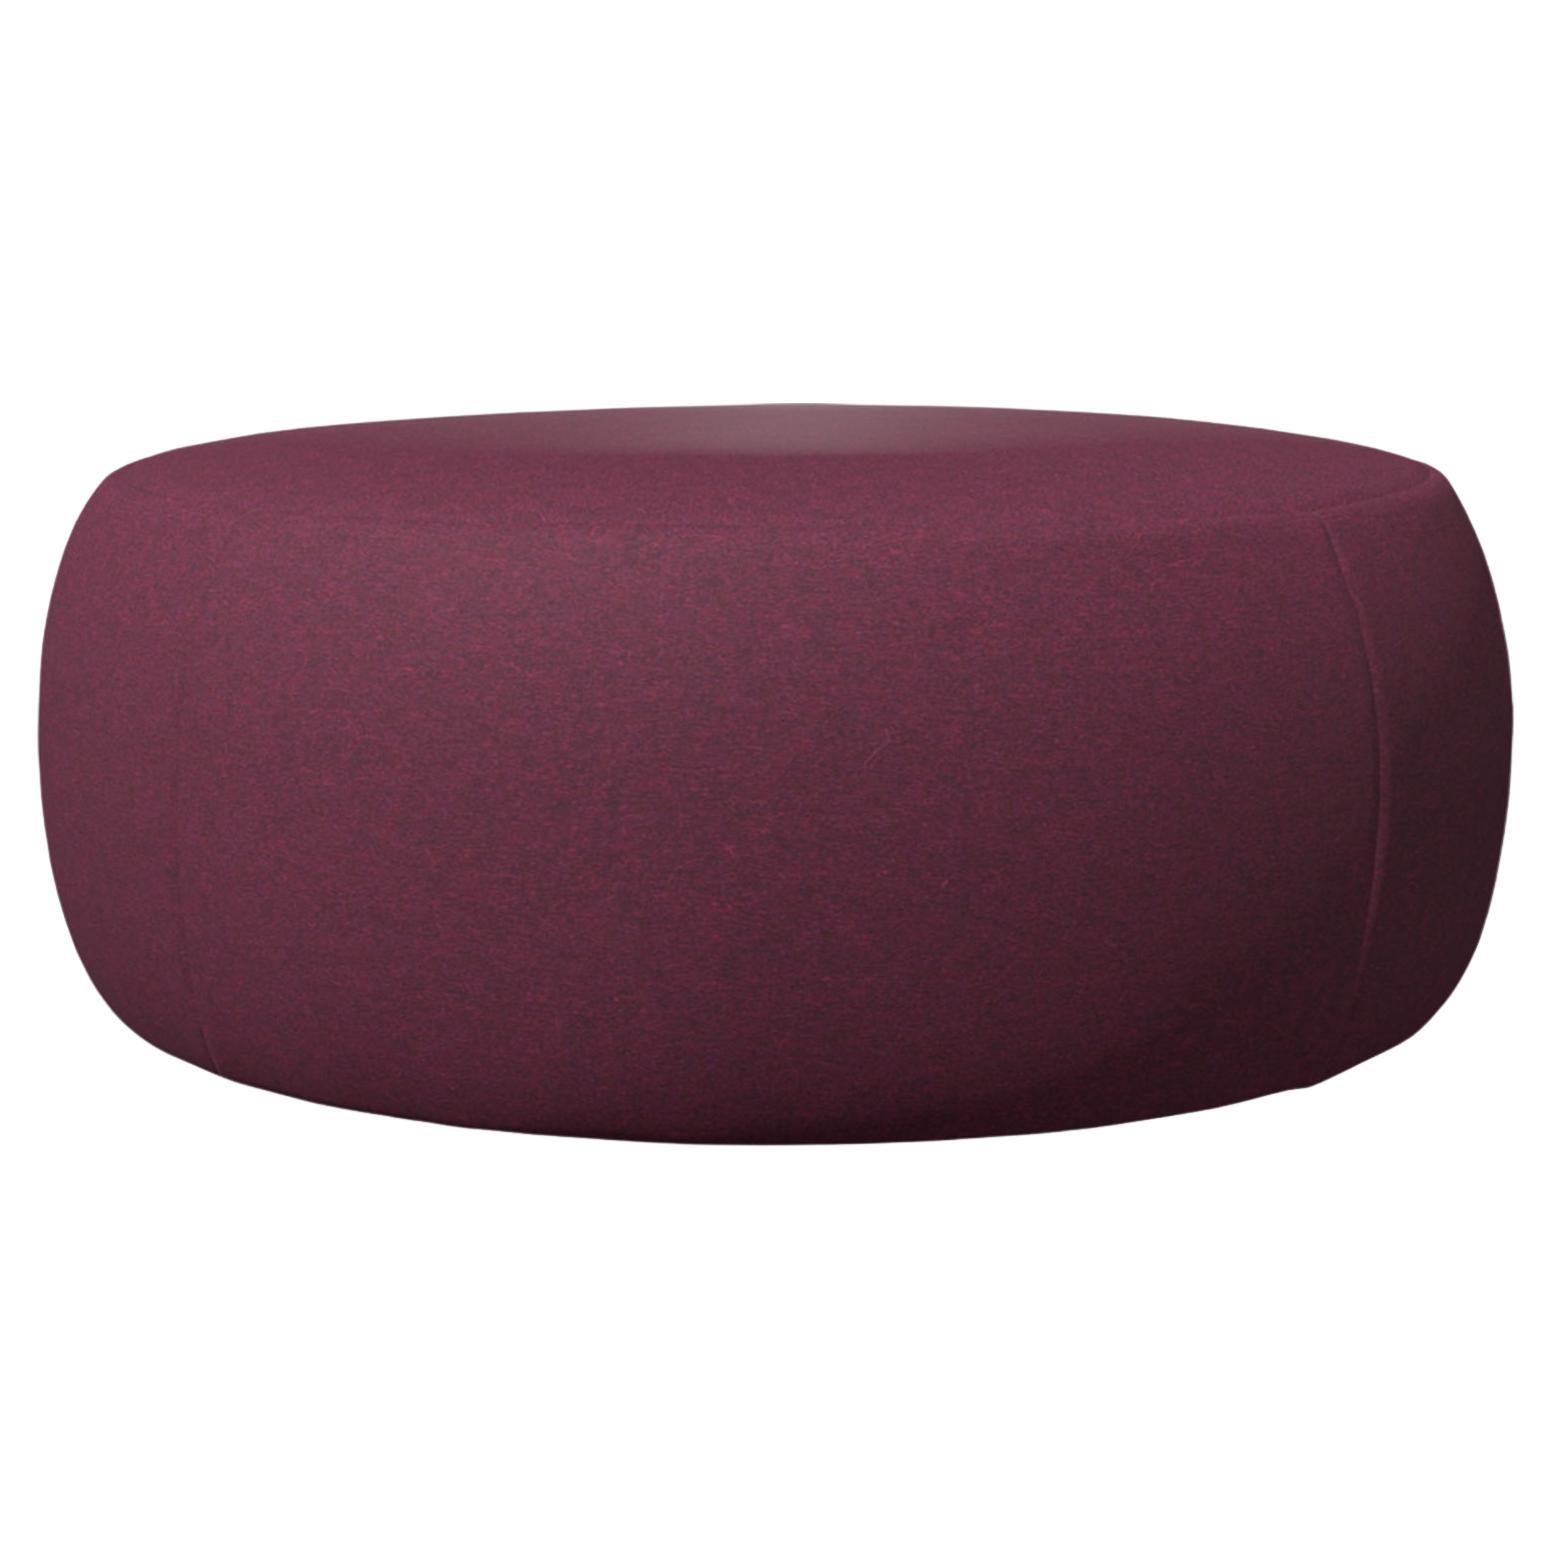 Moooi Pooof Large Pouf in Divina MD, 683 Purple Upholstery For Sale